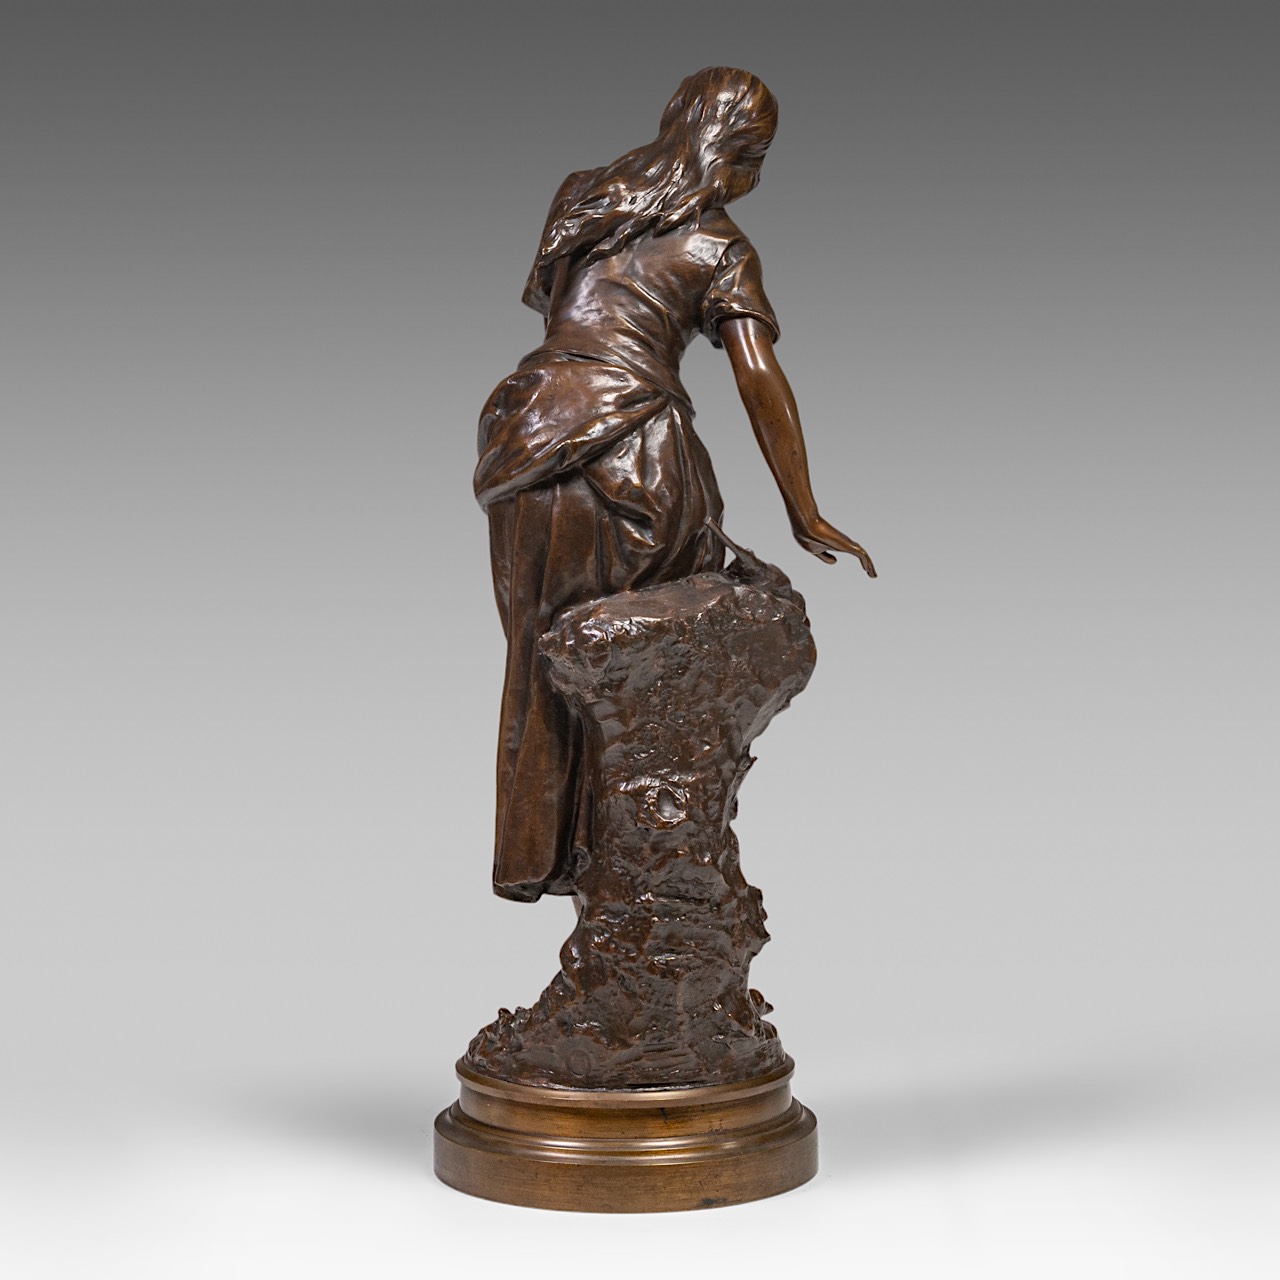 Mathurin Moreau (1822-1912), the spinner, patinated bronze, Hors Concours, H 89 cm - Image 4 of 8